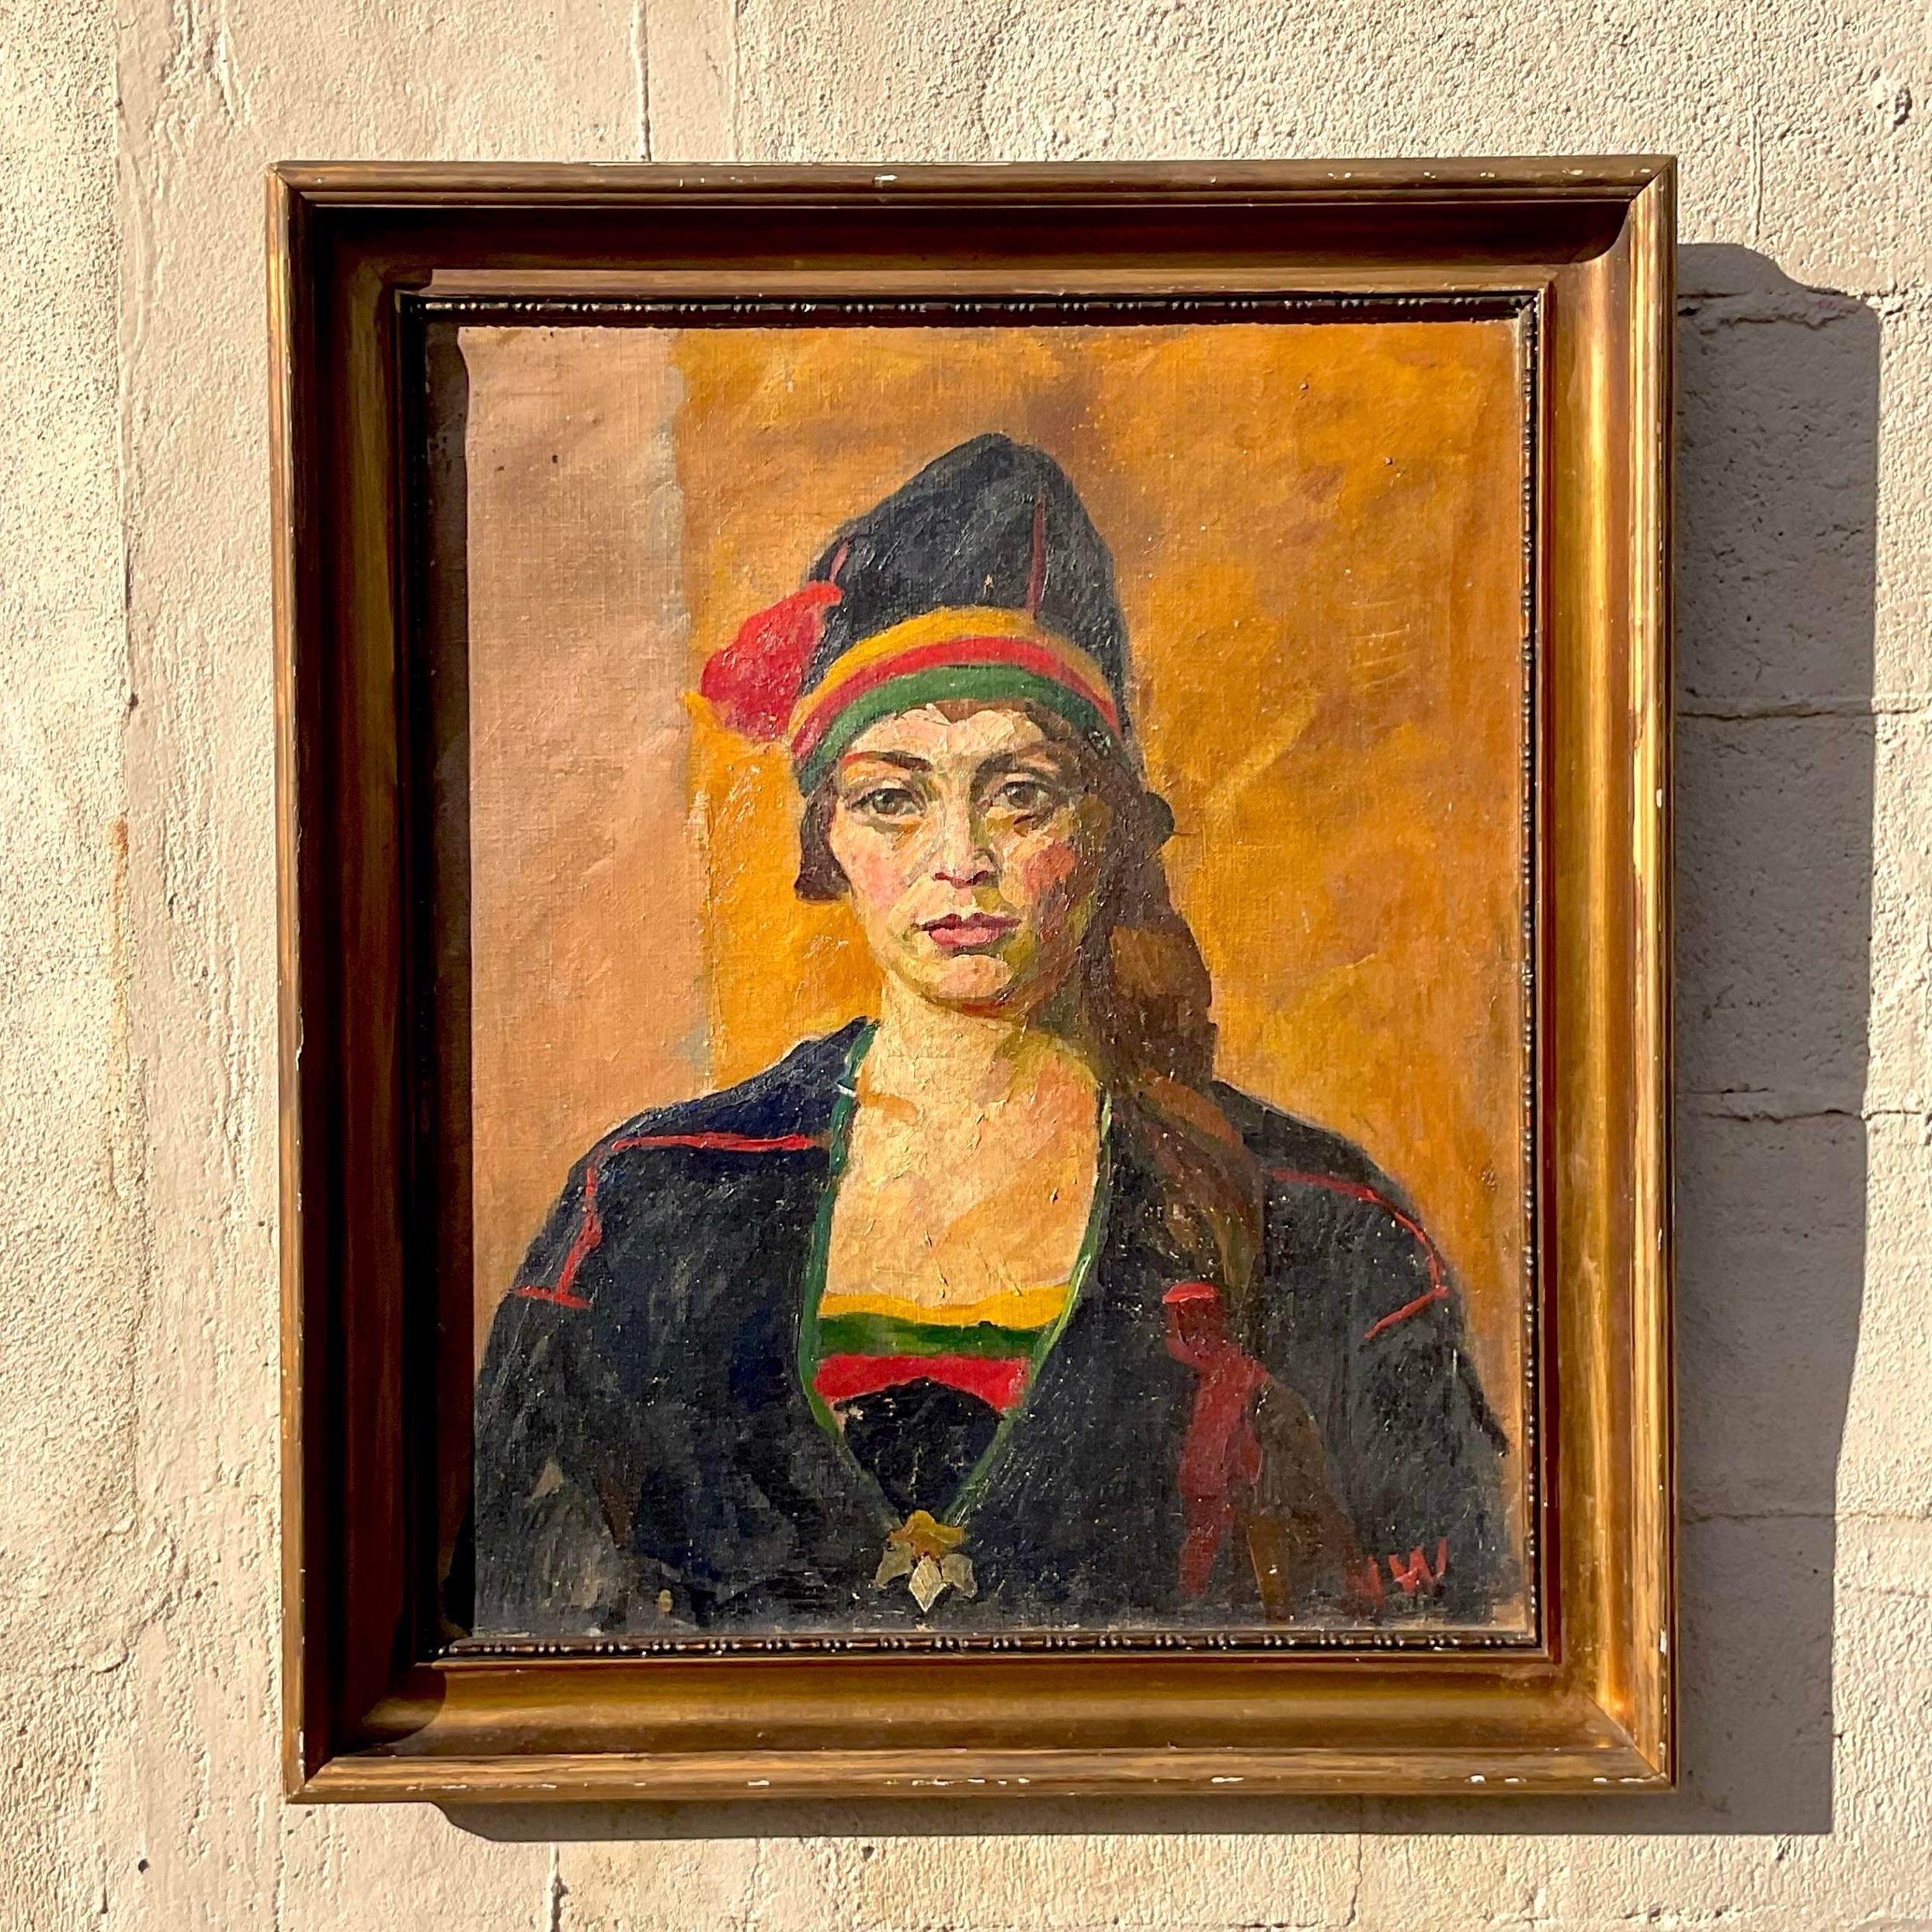 A fantastic vintage Boho original oil painting on canvas. A chic portrait in deep rich colors. Signed by the artist. A beautiful all over patina from time. Acquired from a Palm Beach estate